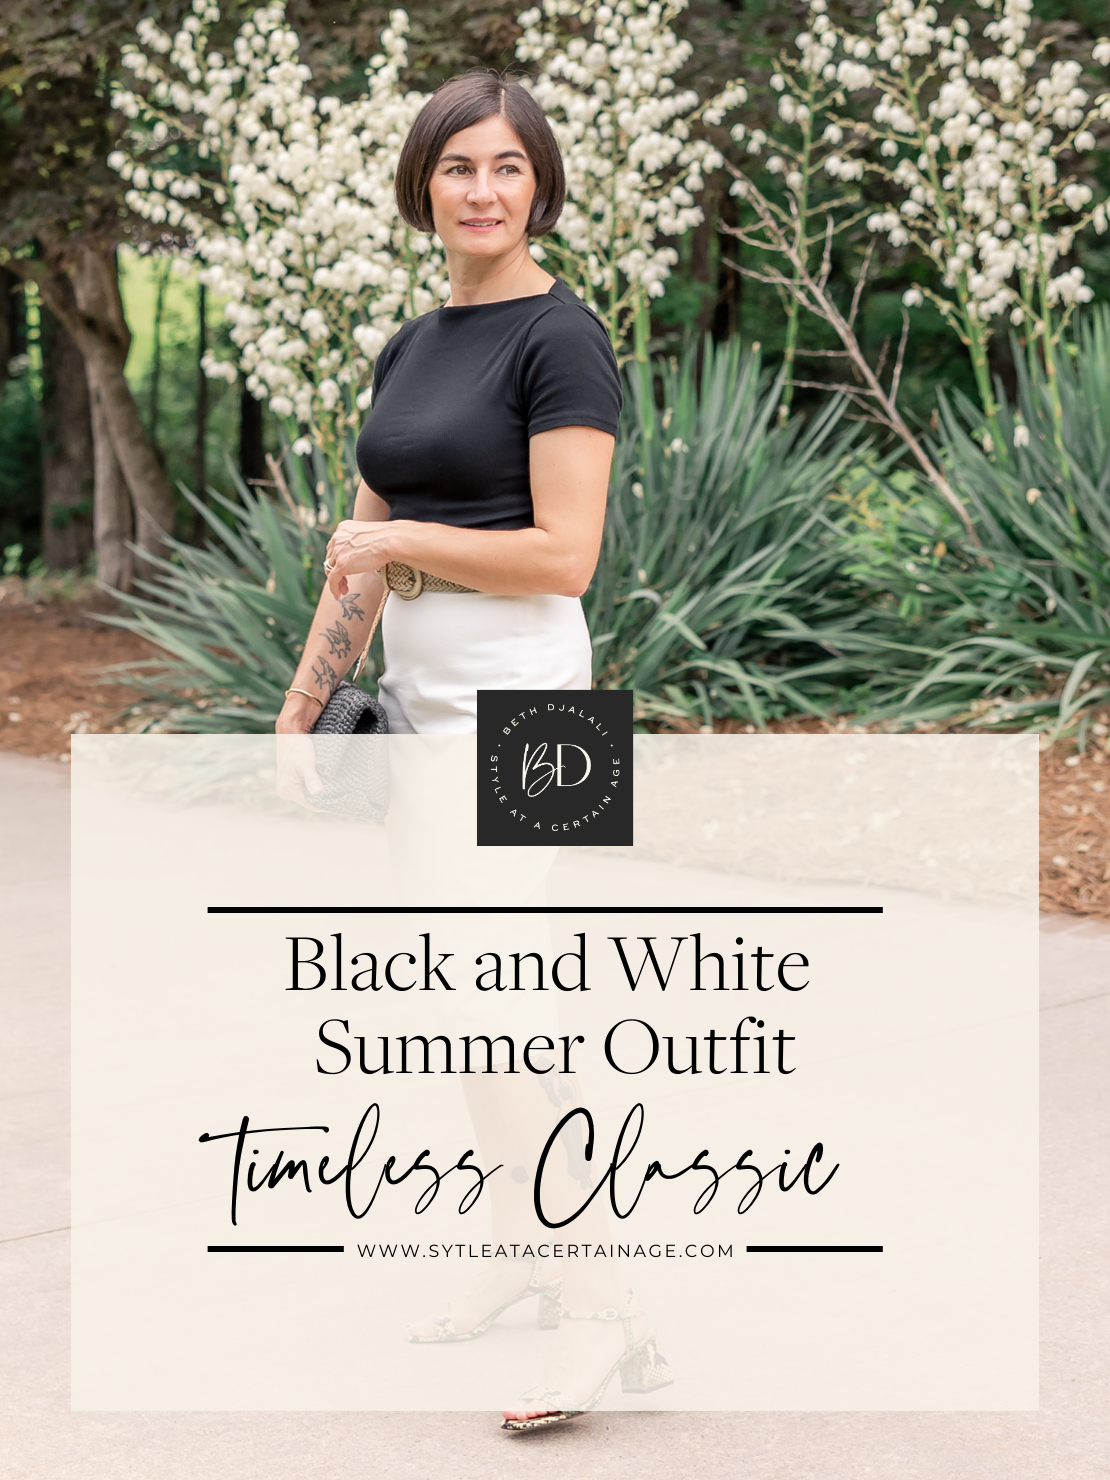 Create a Sophisticated Look with a Black and White Summer Outfit